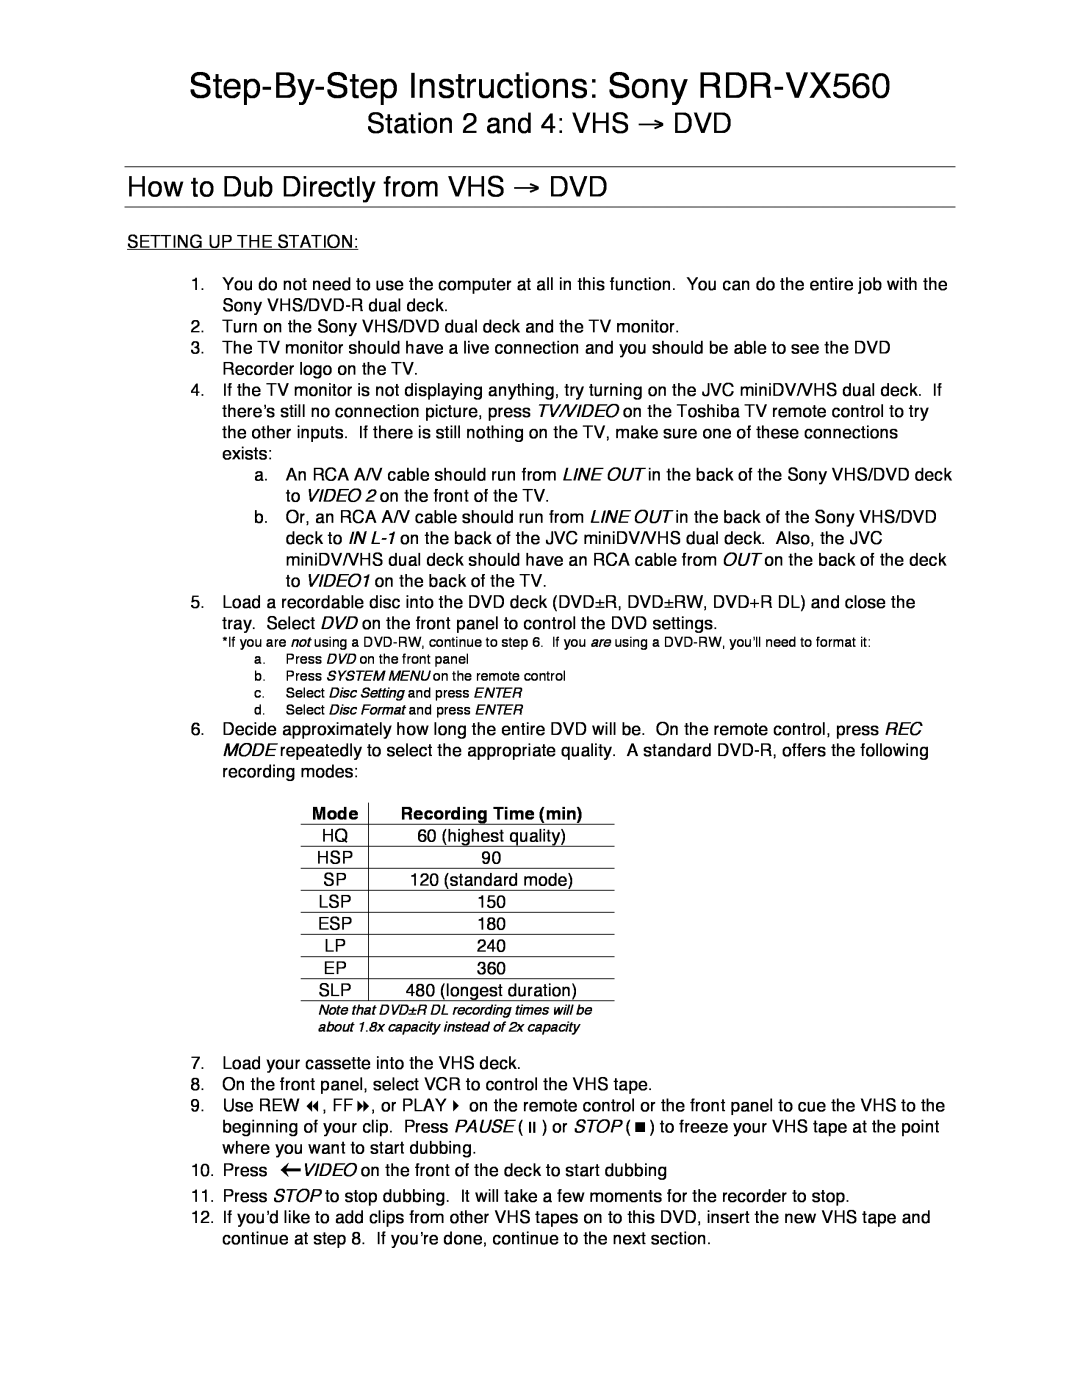 Sony manual Step-By-StepInstructions Sony RDR-VX560, Station 2 and 4 VHS → DVD, How to Dub Directly from VHS → DVD 